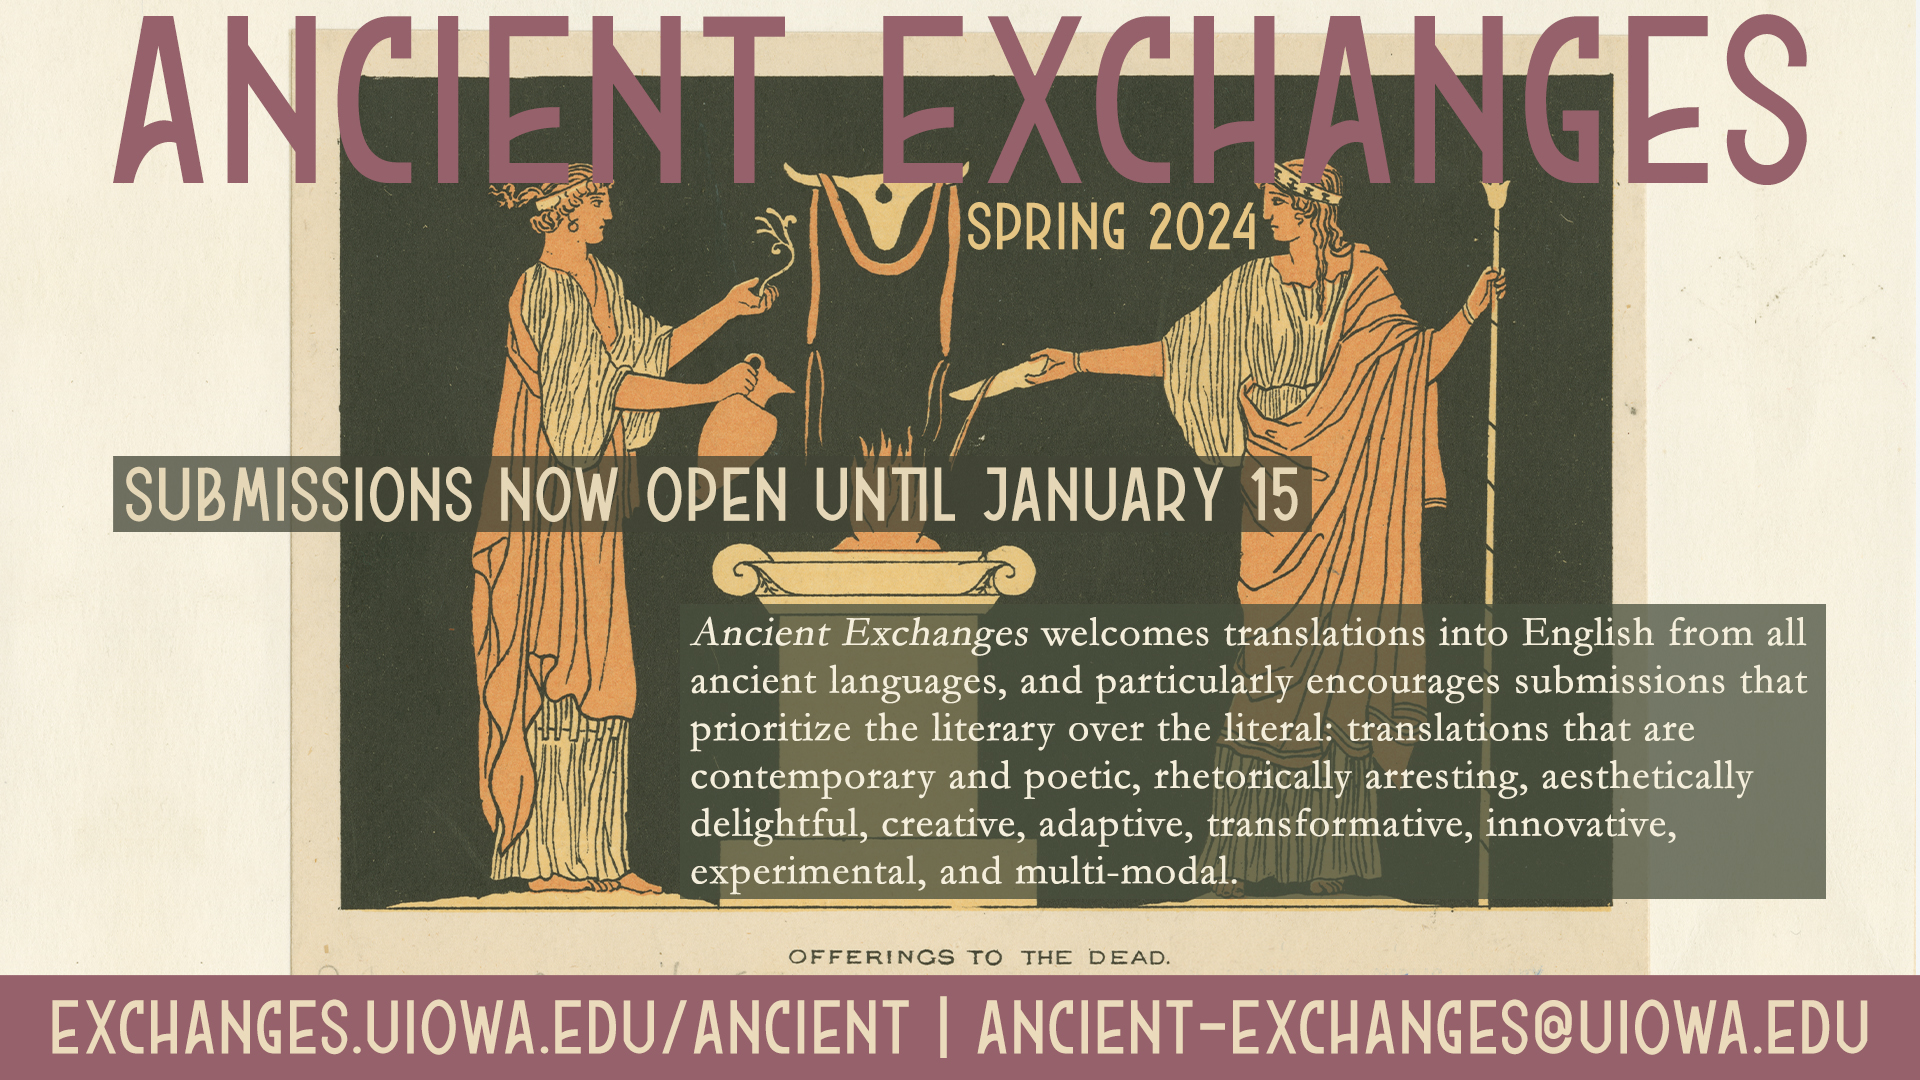 Ancient exchanges submissions due Jan 15